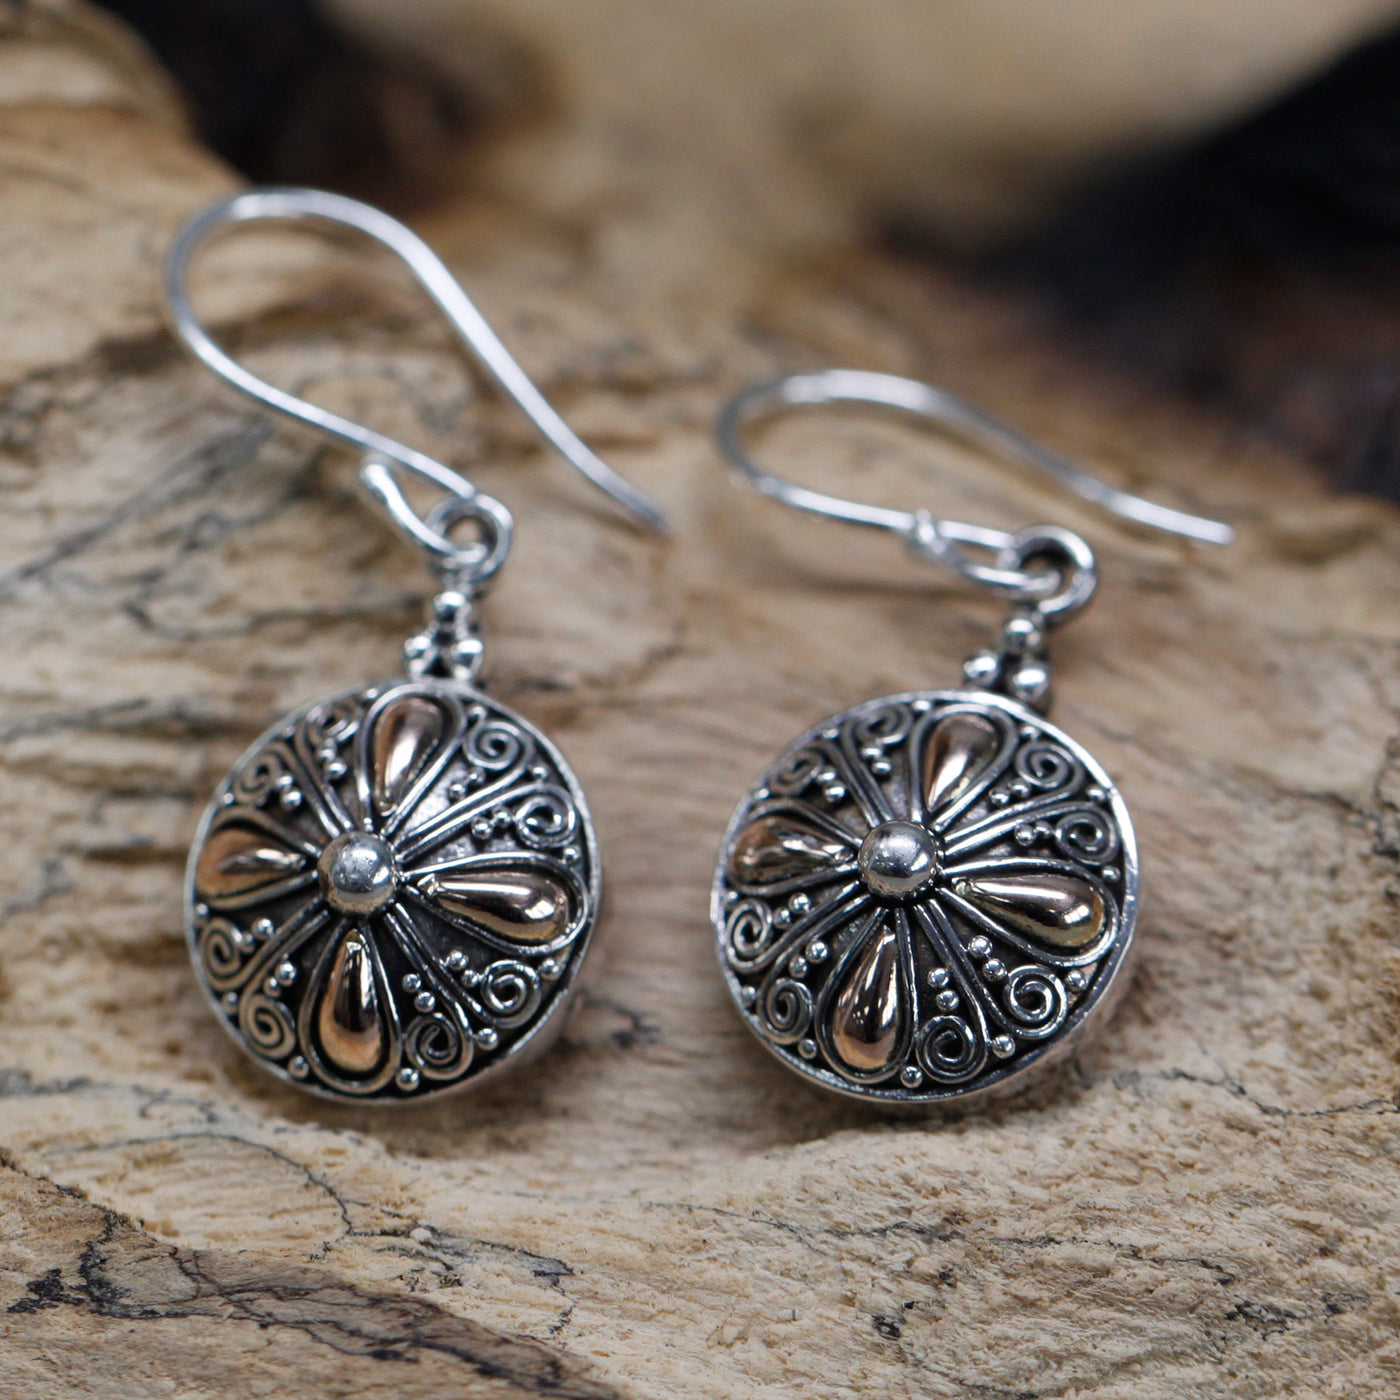 Women's Gold And Silver Round Drop Exotic Earrings.